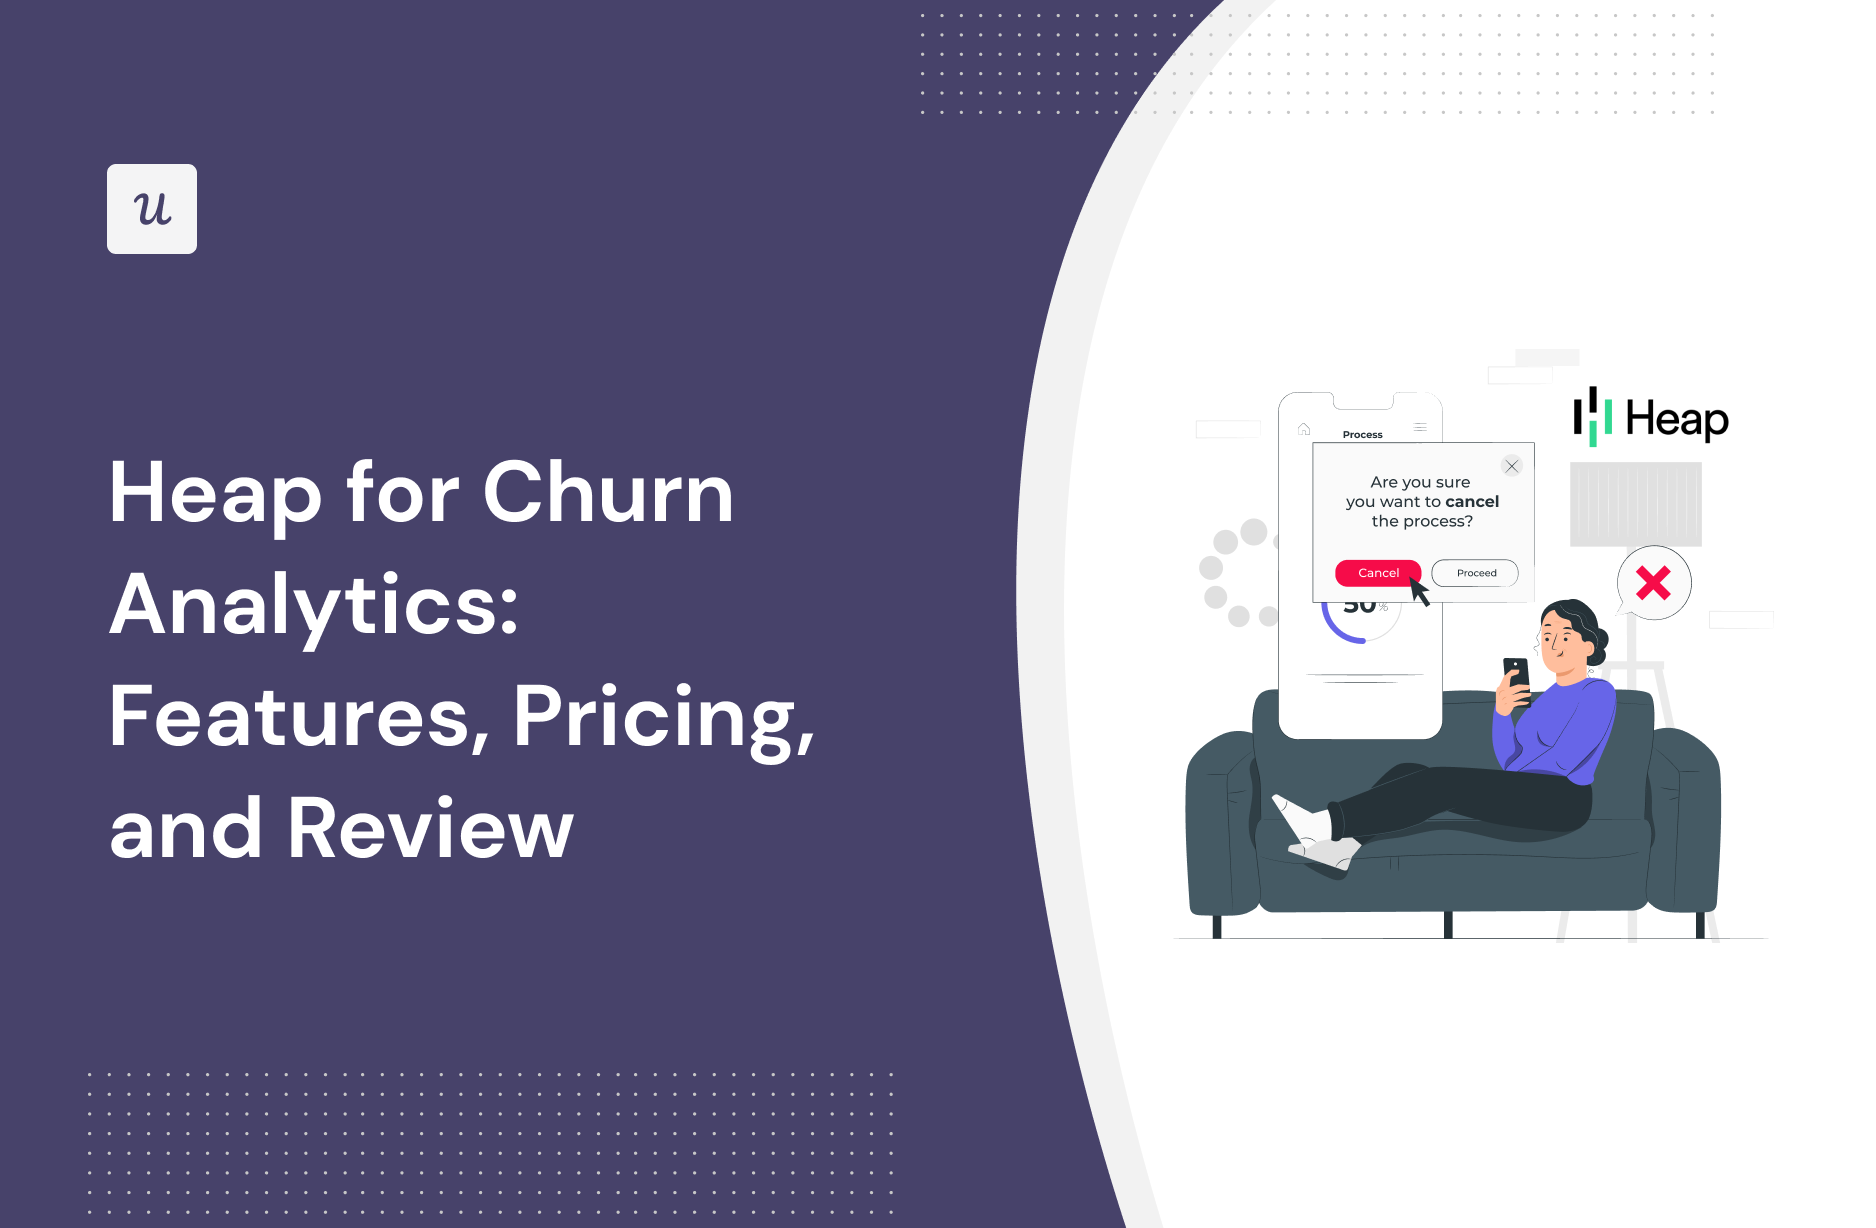 Heap for Churn Analytics: Features, Pricing, and Review